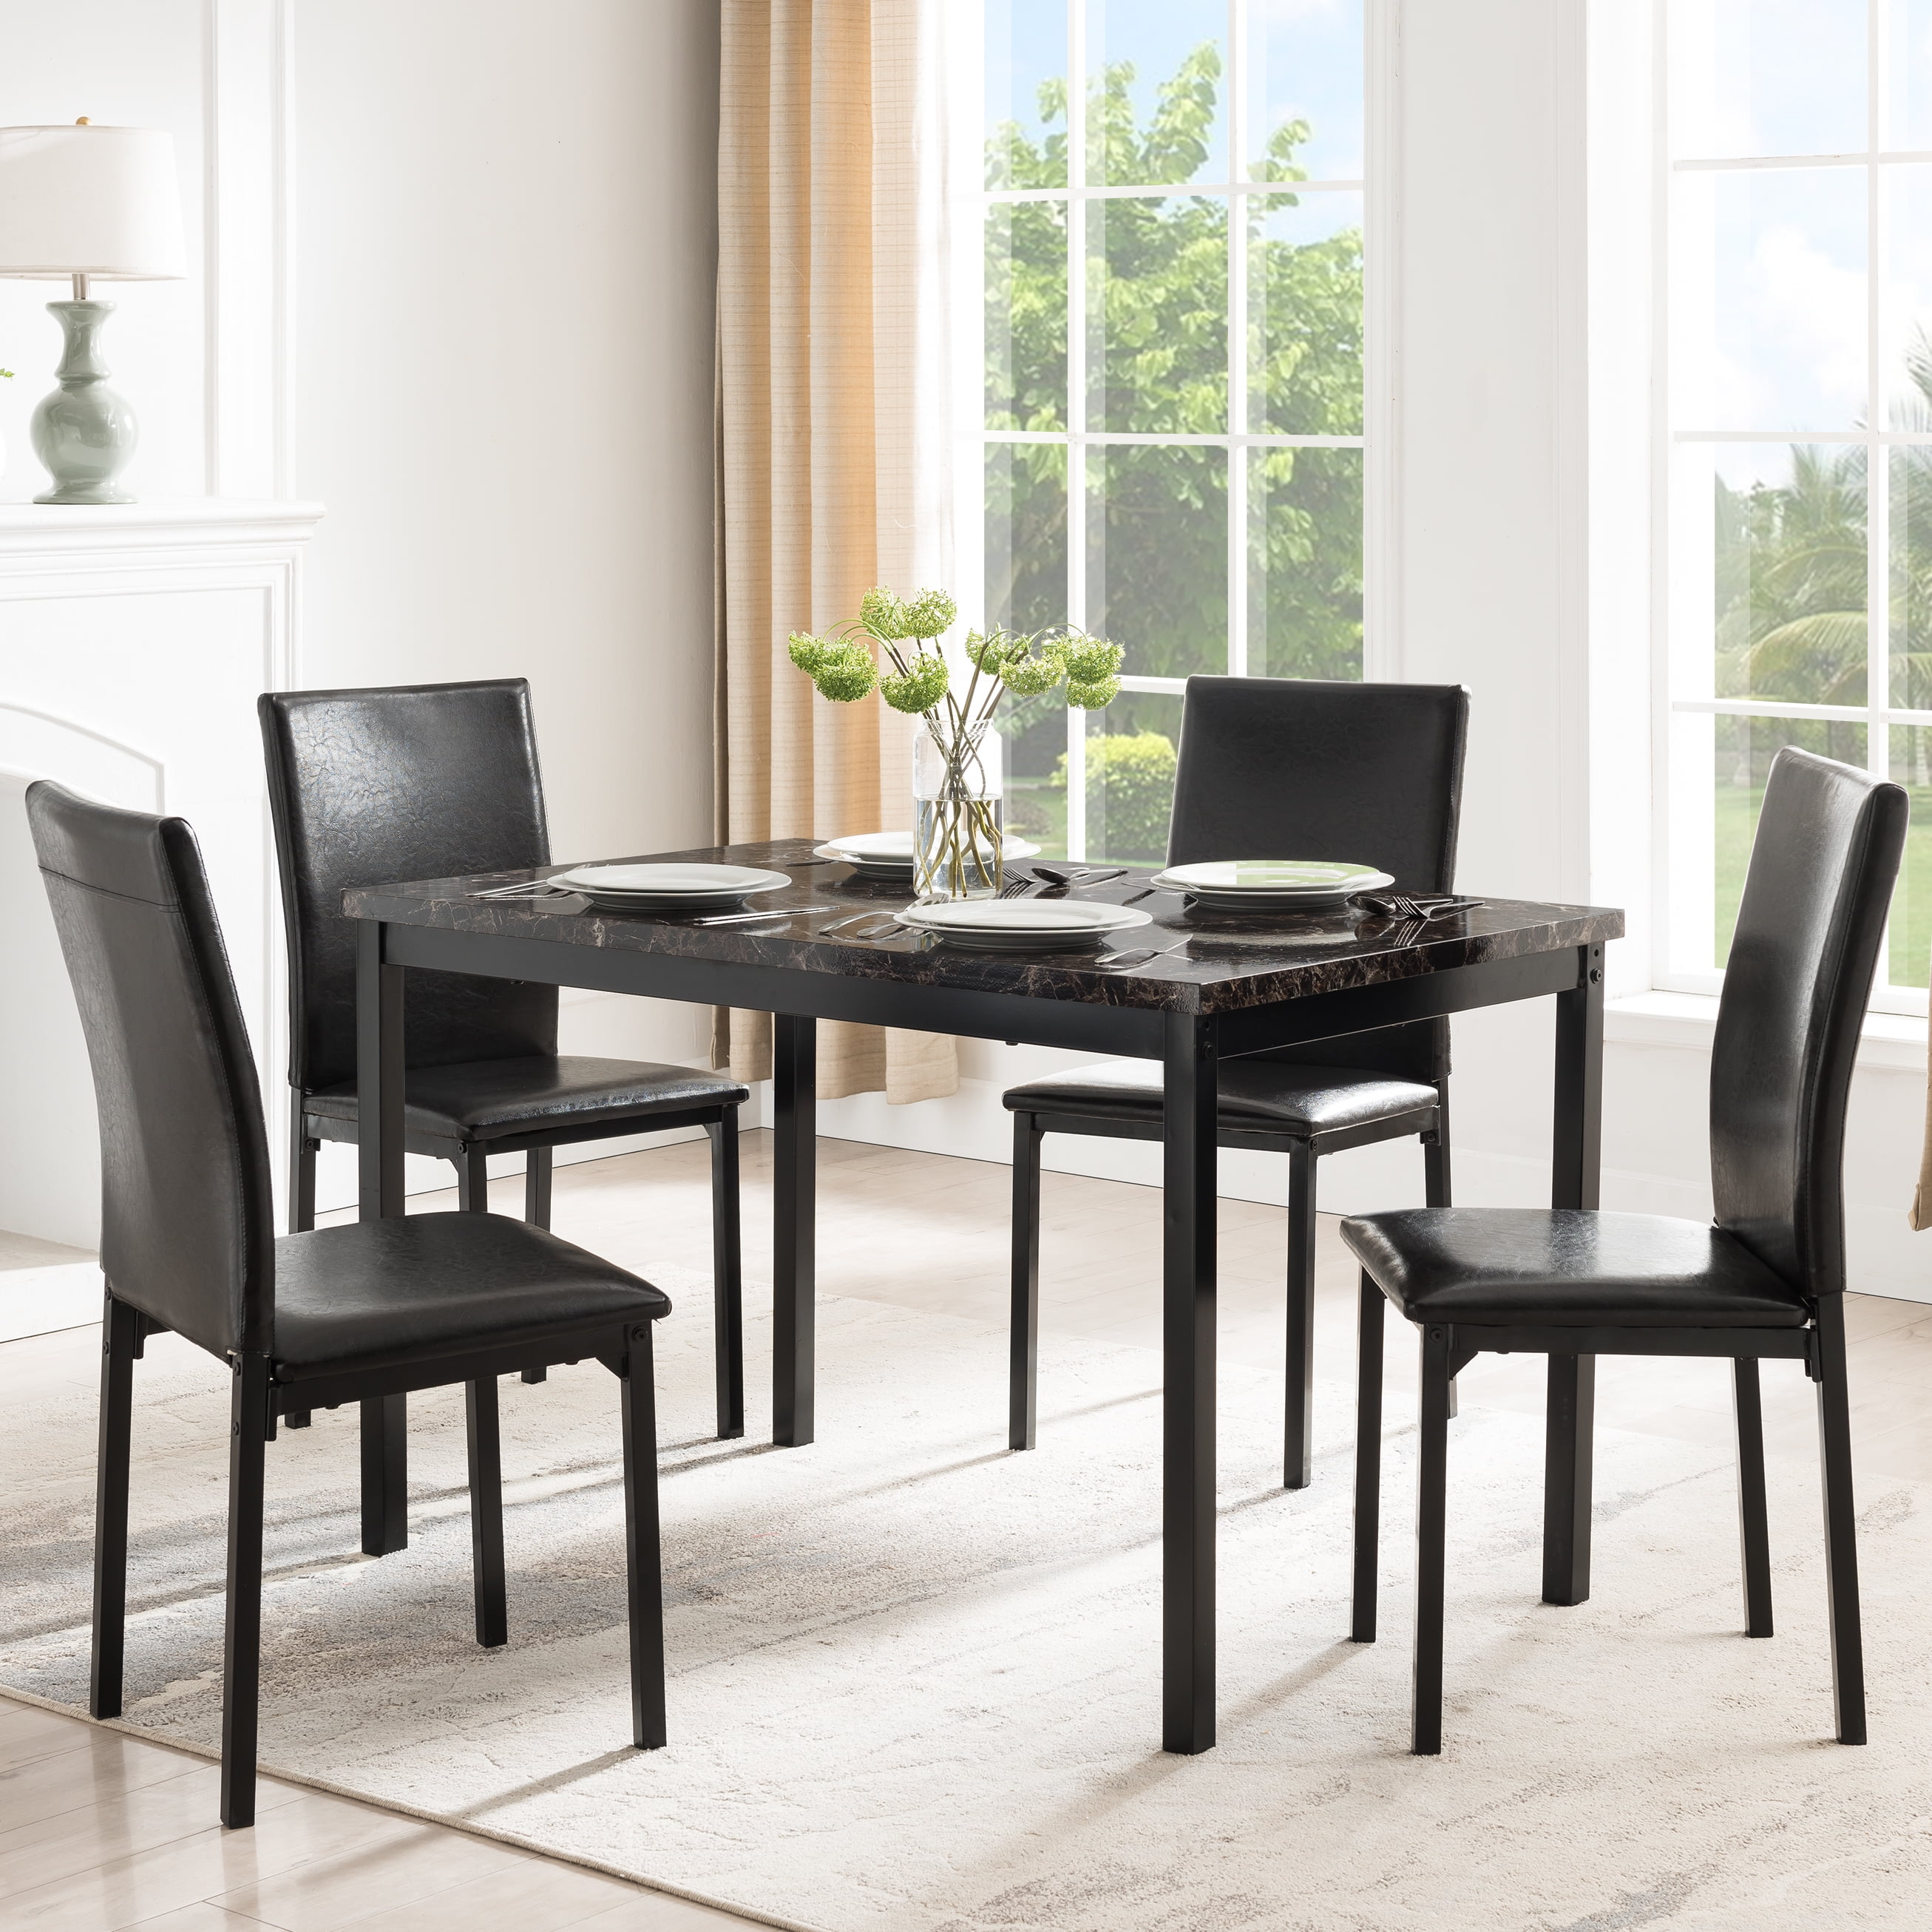 Mainstays 5 Piece Dining Set, Faux Marble Table Top and 4 PU Chairs